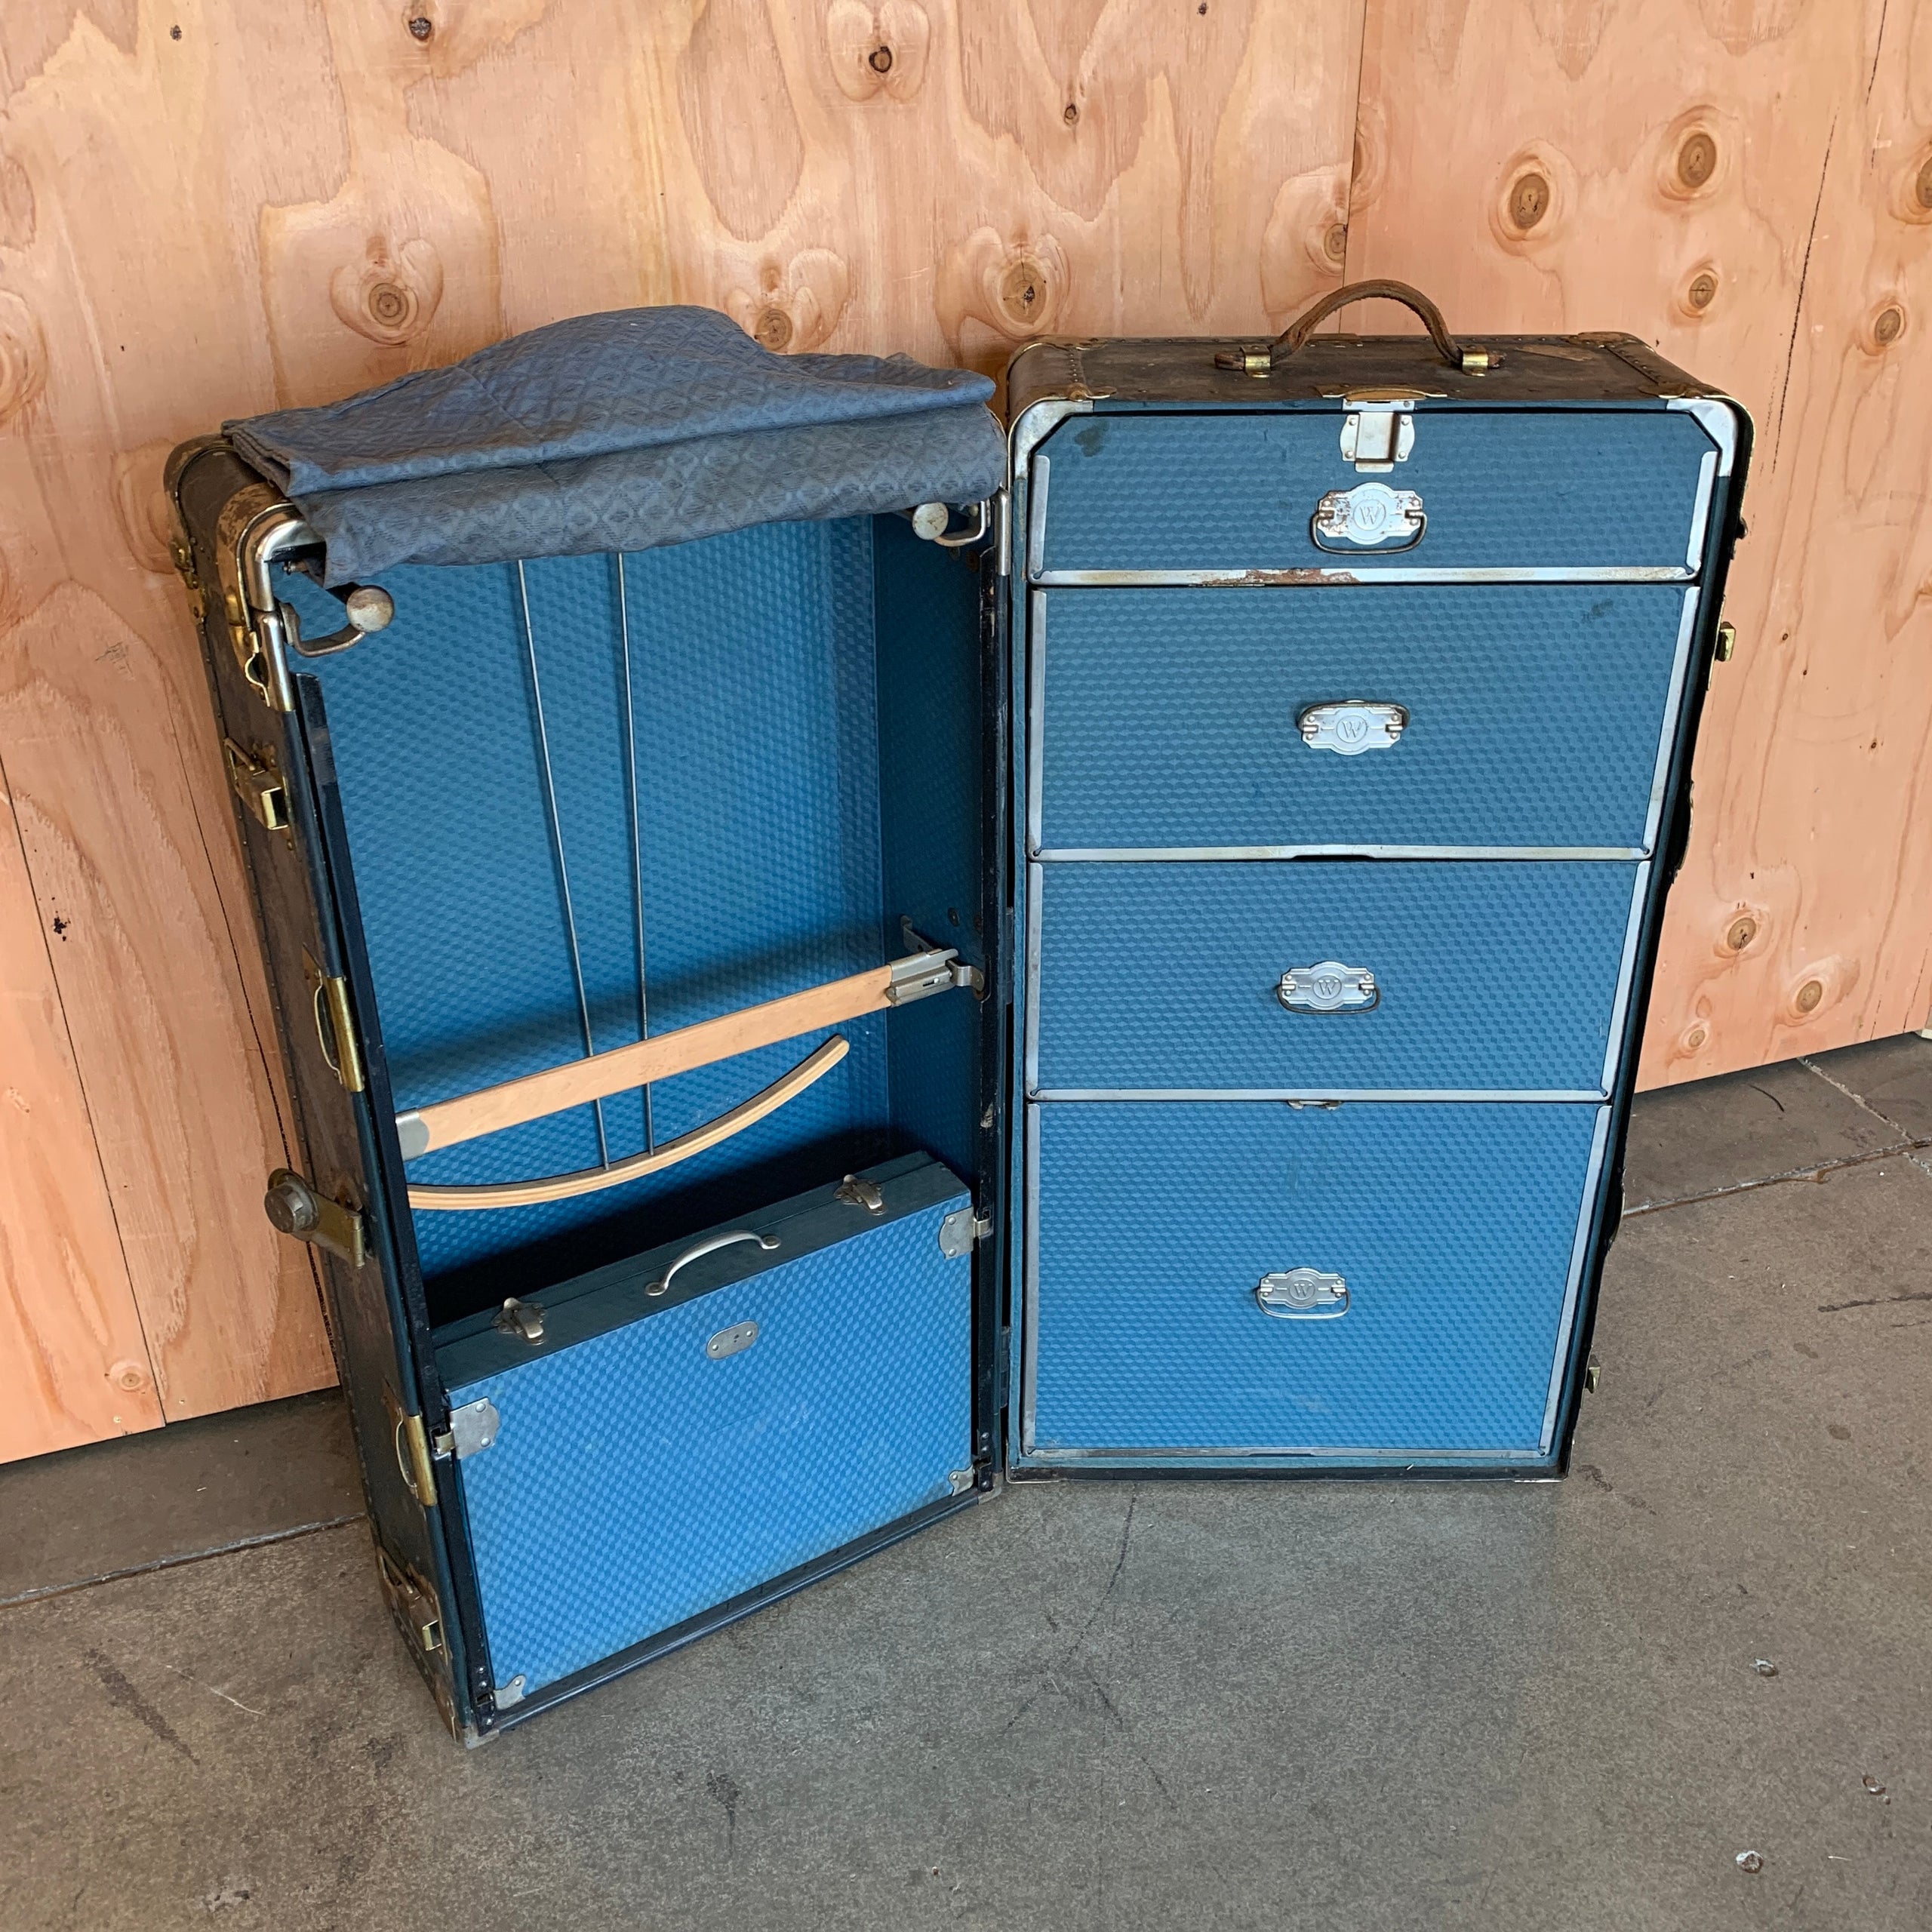 Antique Wheary Cushioned Top Wardrobe Trunk - Chests & Trunks - Pequot  Lakes, Minnesota, Facebook Marketplace